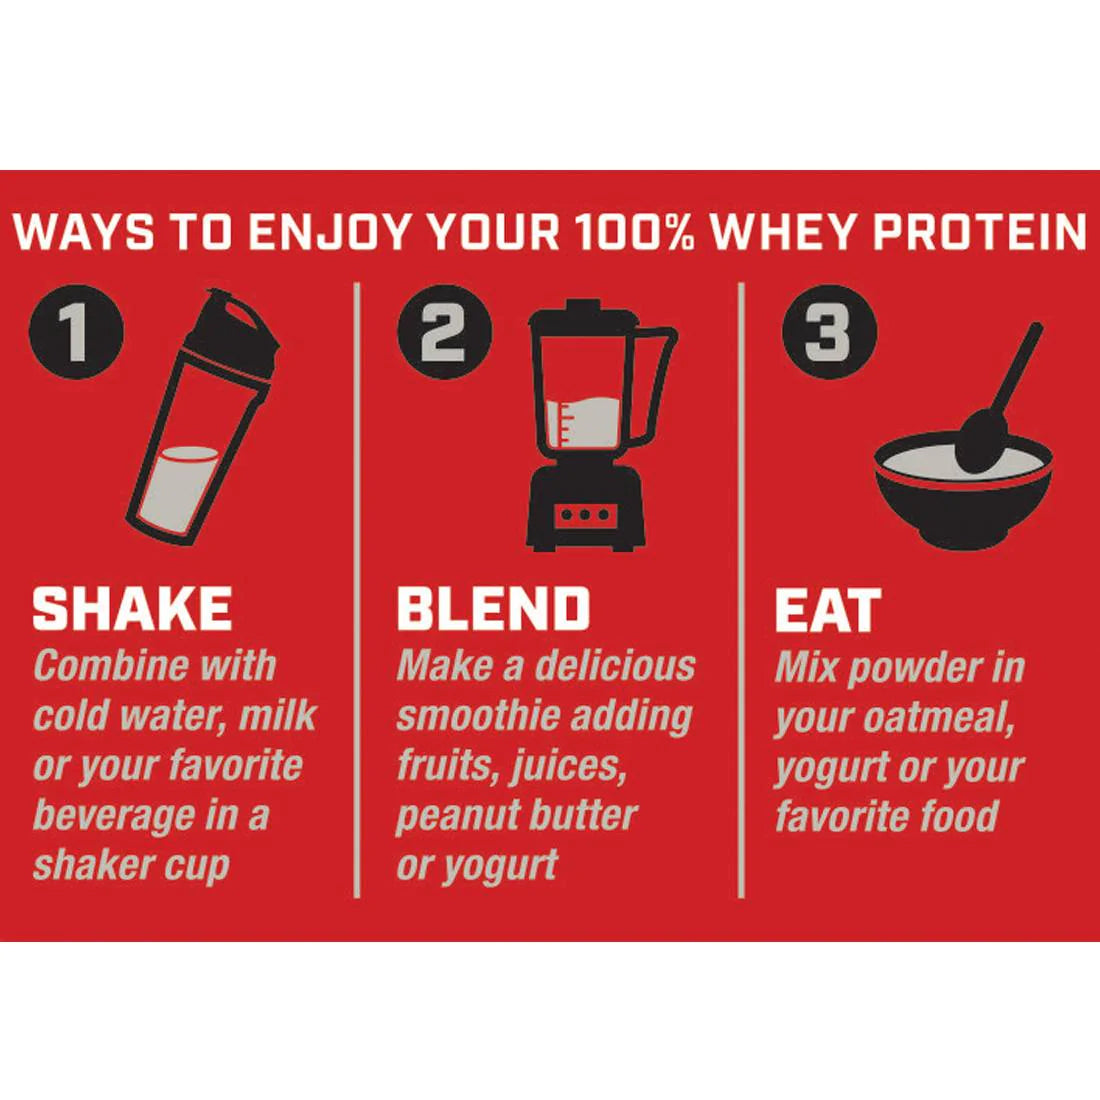 Gnc Pro 100% Whey Protein 1Kg, 2.2lb (30Servings) and Get free calcium plus (60N)